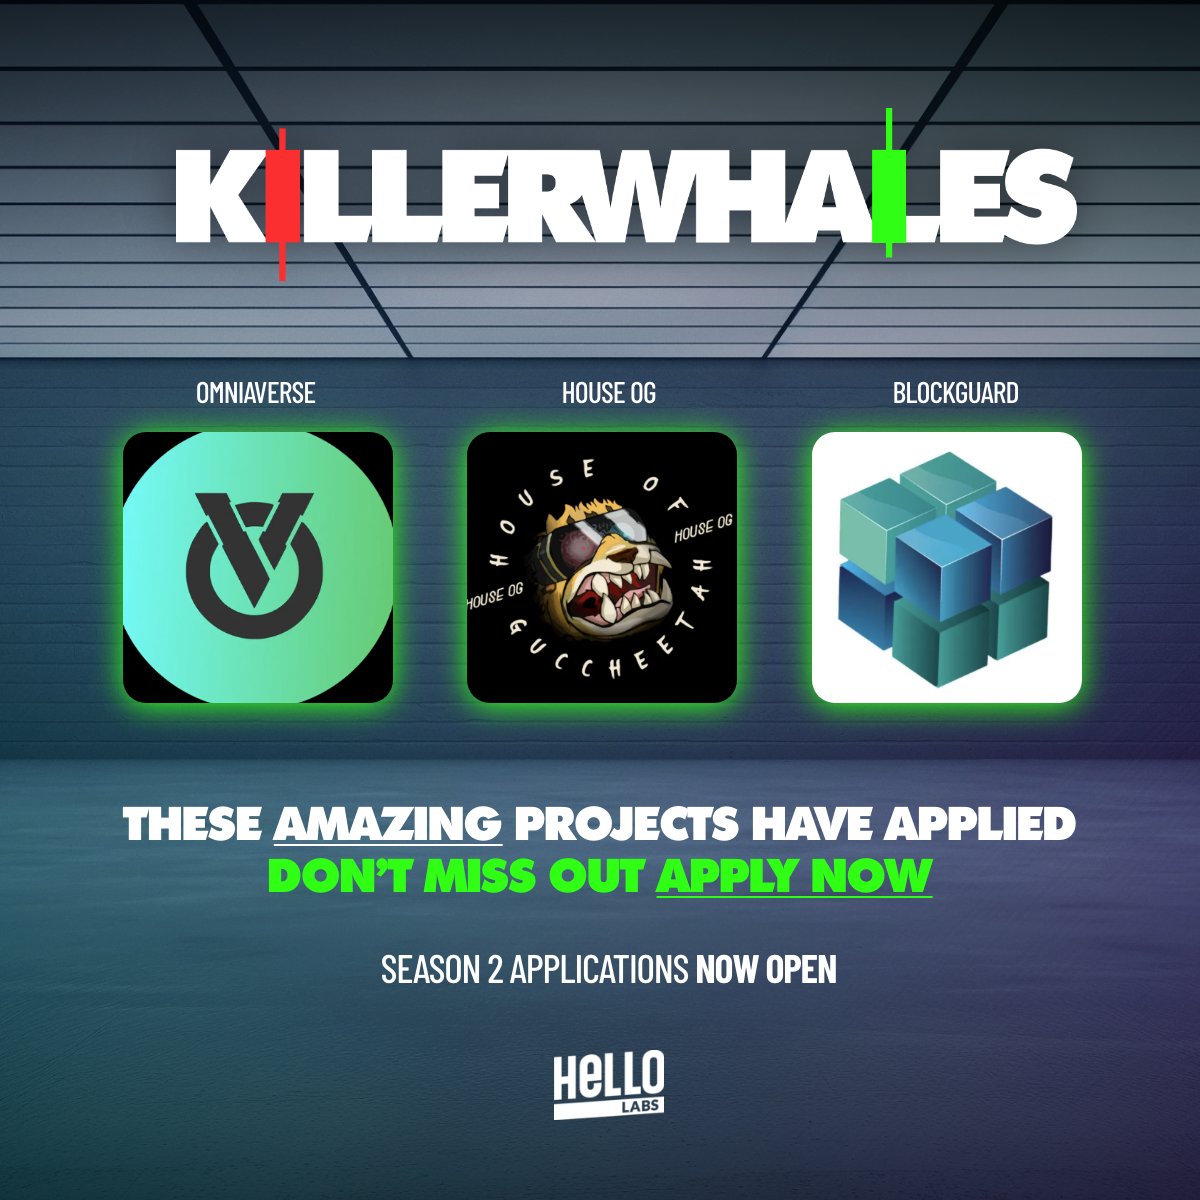 5 days until voting starts for Season 2 of @KillerWhalesTV 🐳 Say $HELLO to these killer projects that are looking to claim a top spot: 🔶@omniaverse 🔶@HouseOGxyz 🔶@blockguard1 Vote for your favorite projects starting May 1st 🔥 Top 3 win a chance to pitch in front of the